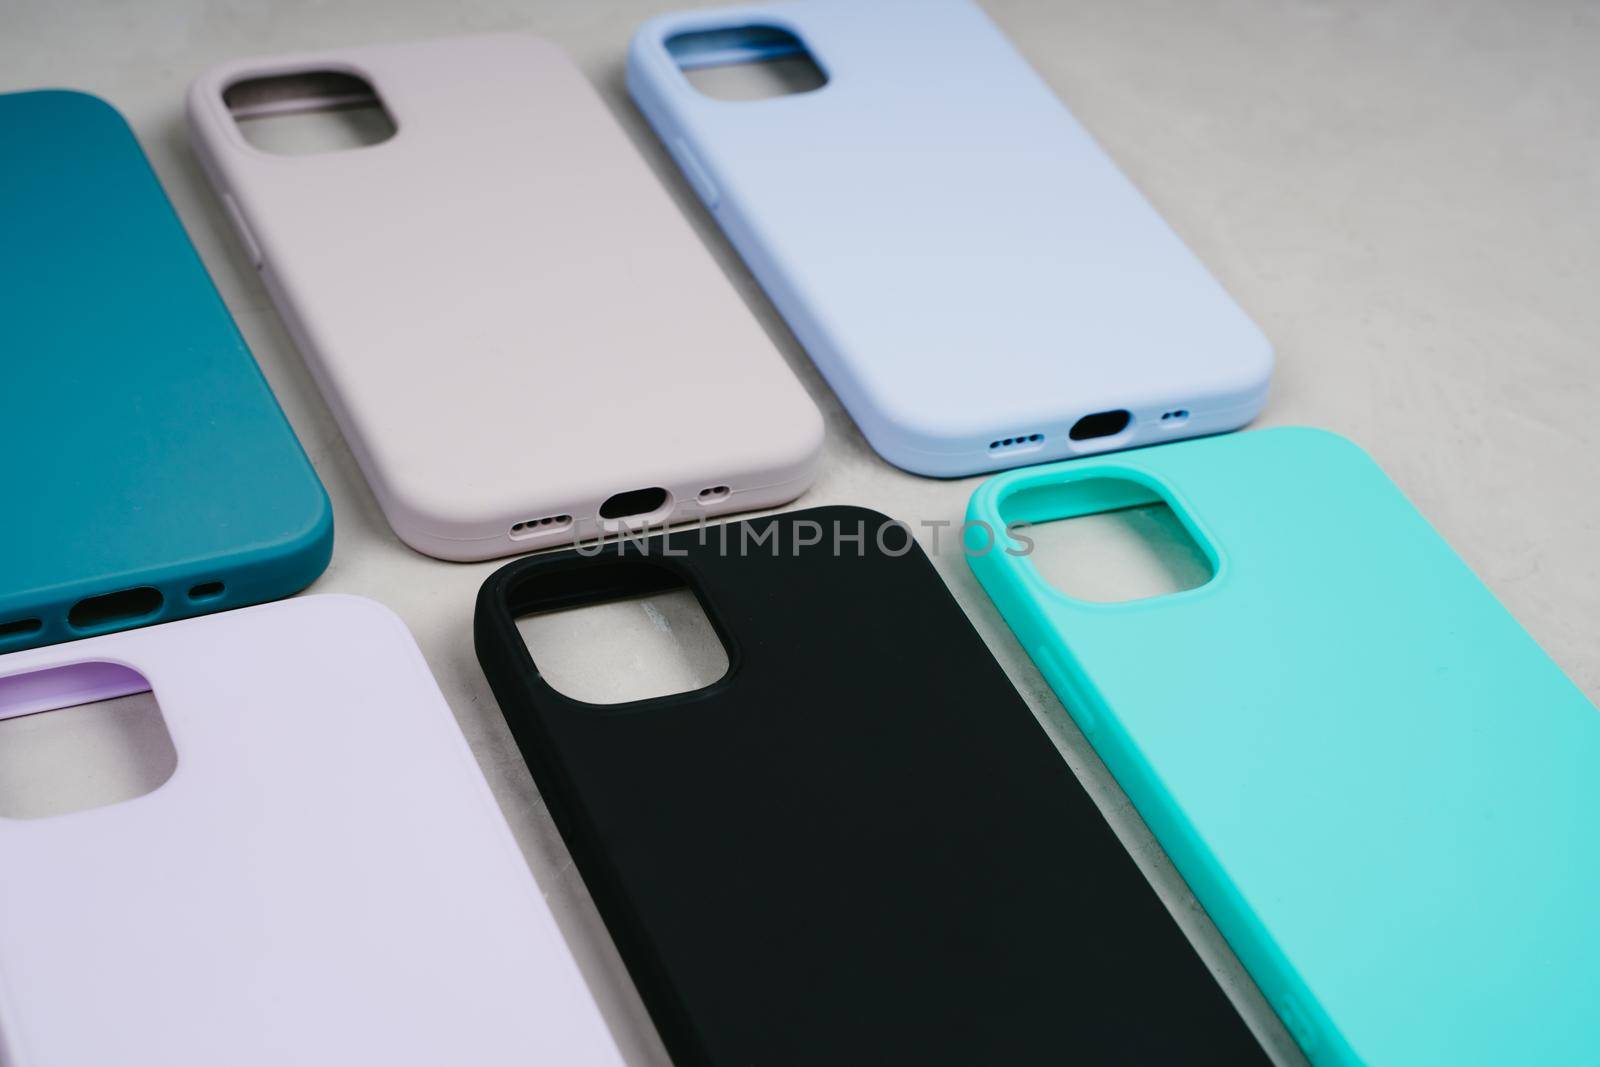 Set of colored silicone cases for smartphone. Cases set for smartphone on grey background. Protection for mobile phone. Colorful silicone phone cases.